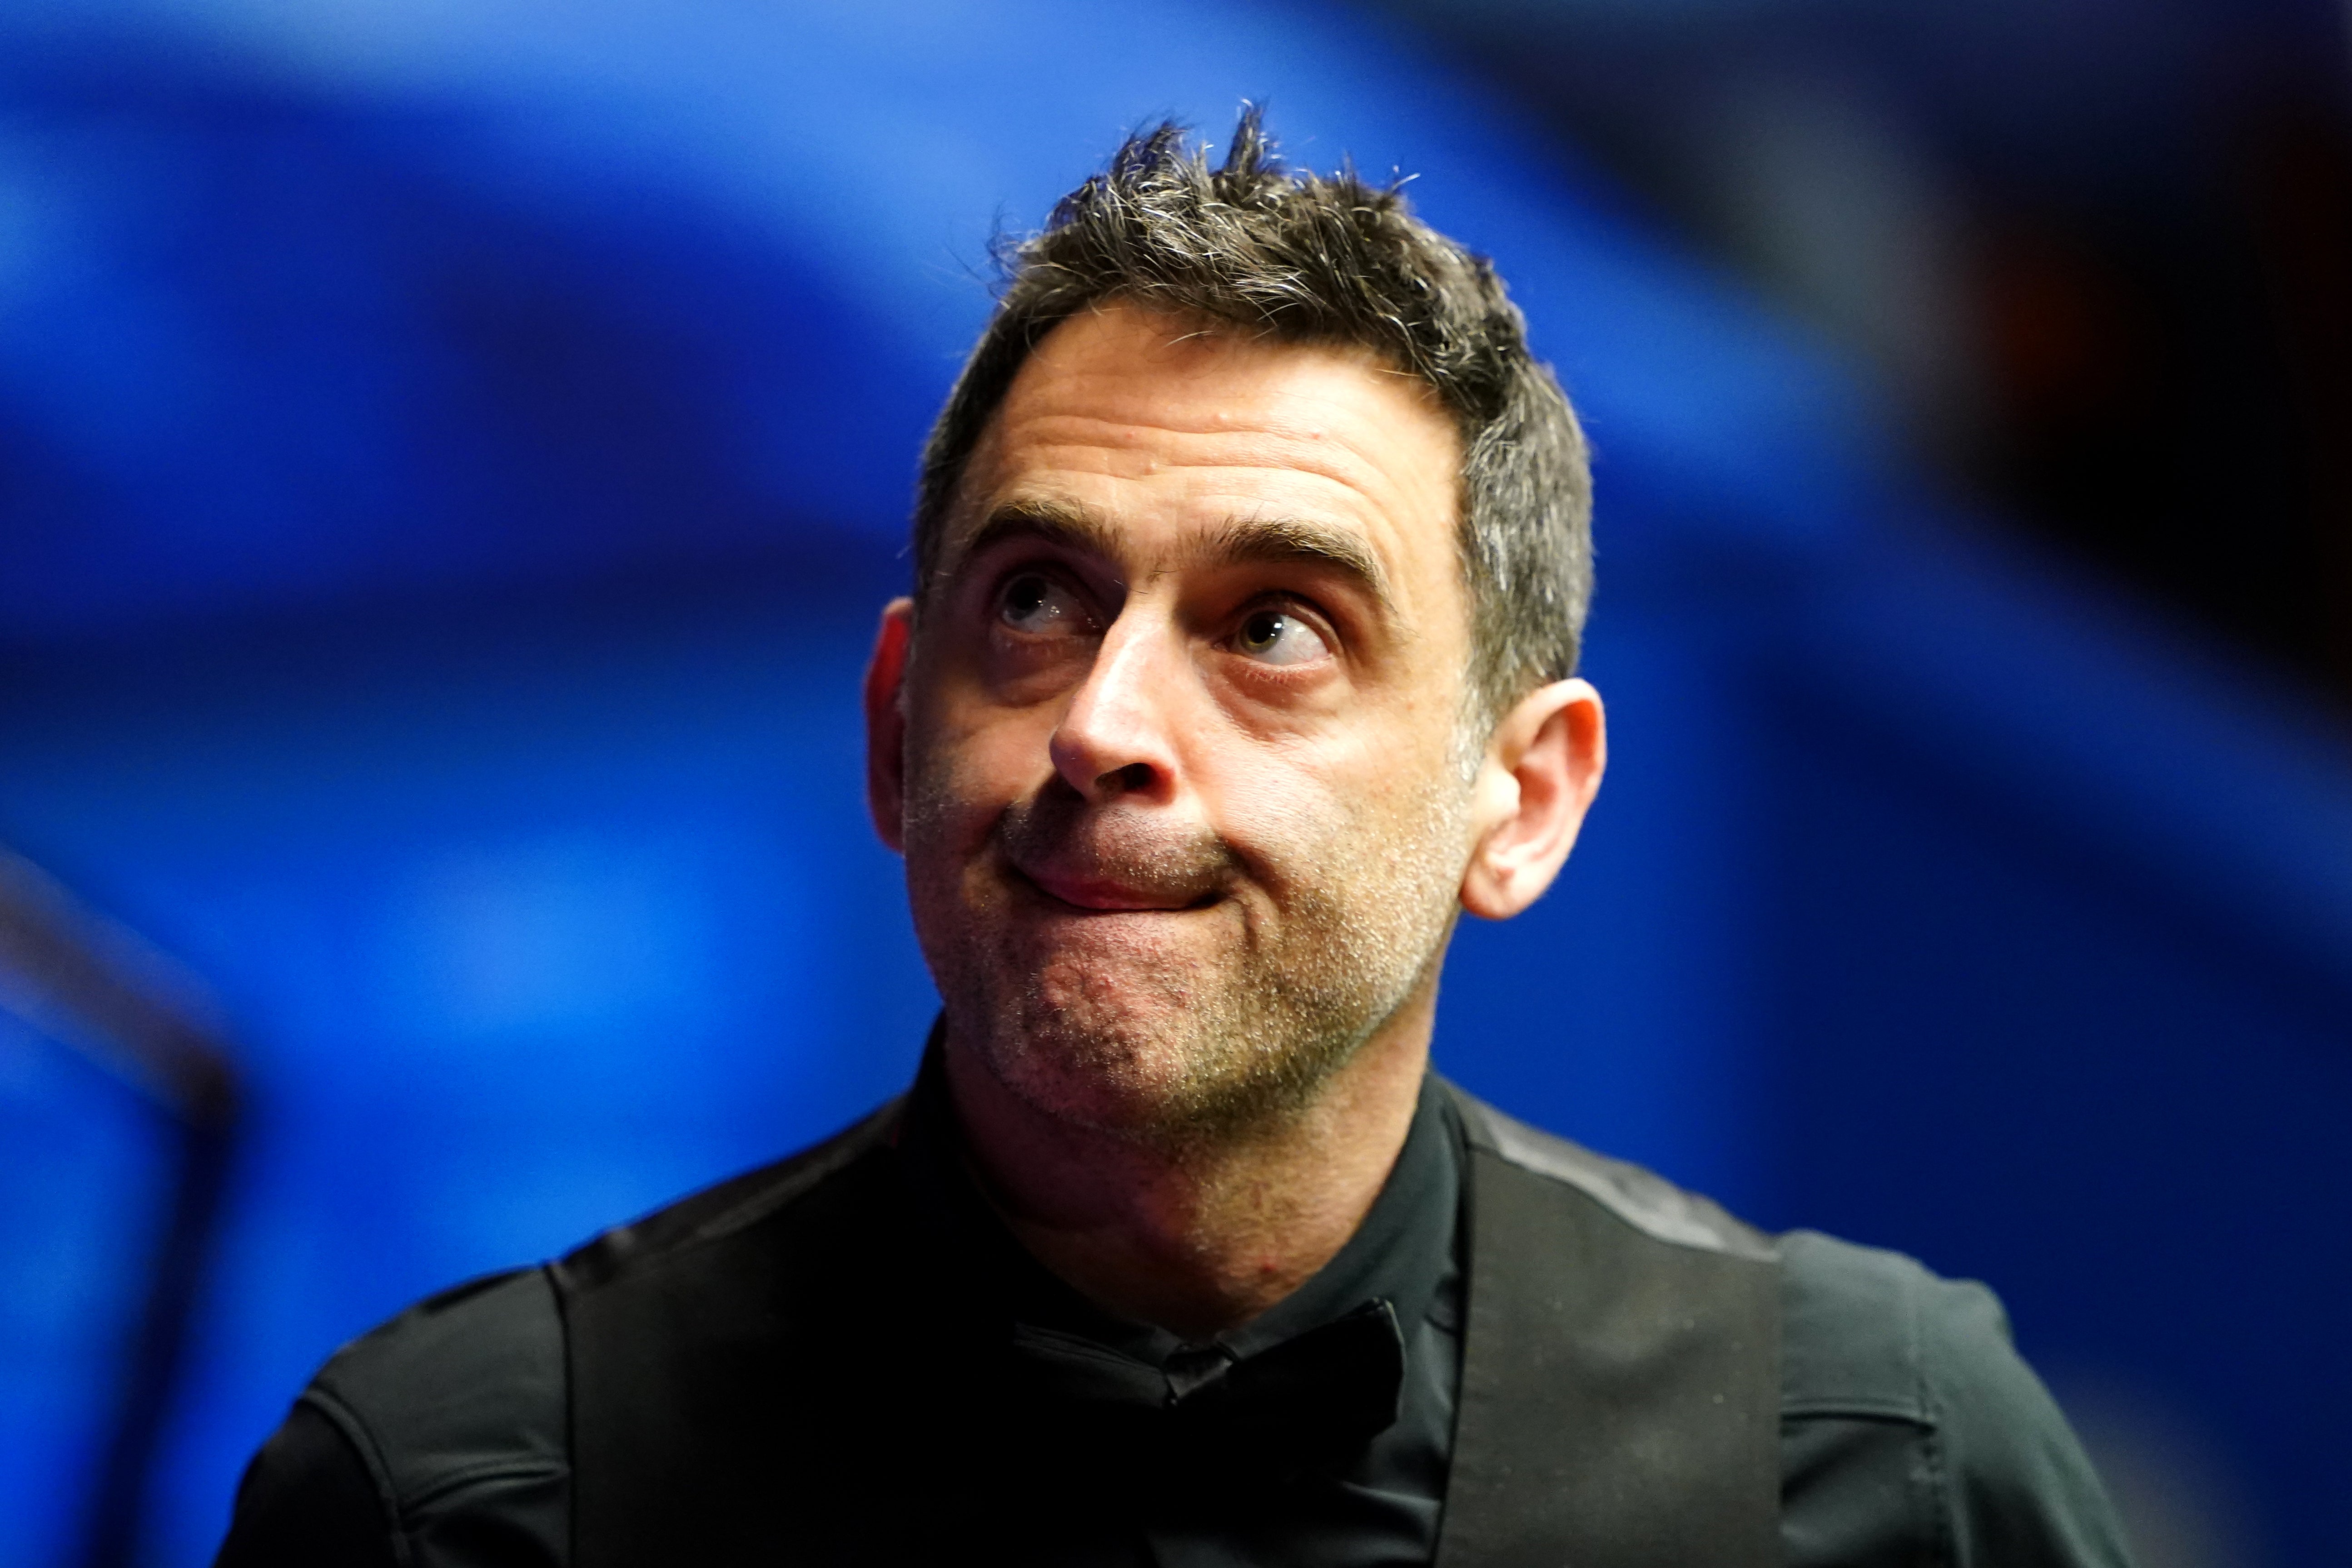 World Snooker Championship 2022 Ronnie OSullivan could face sanction after lewd gesture The Independent